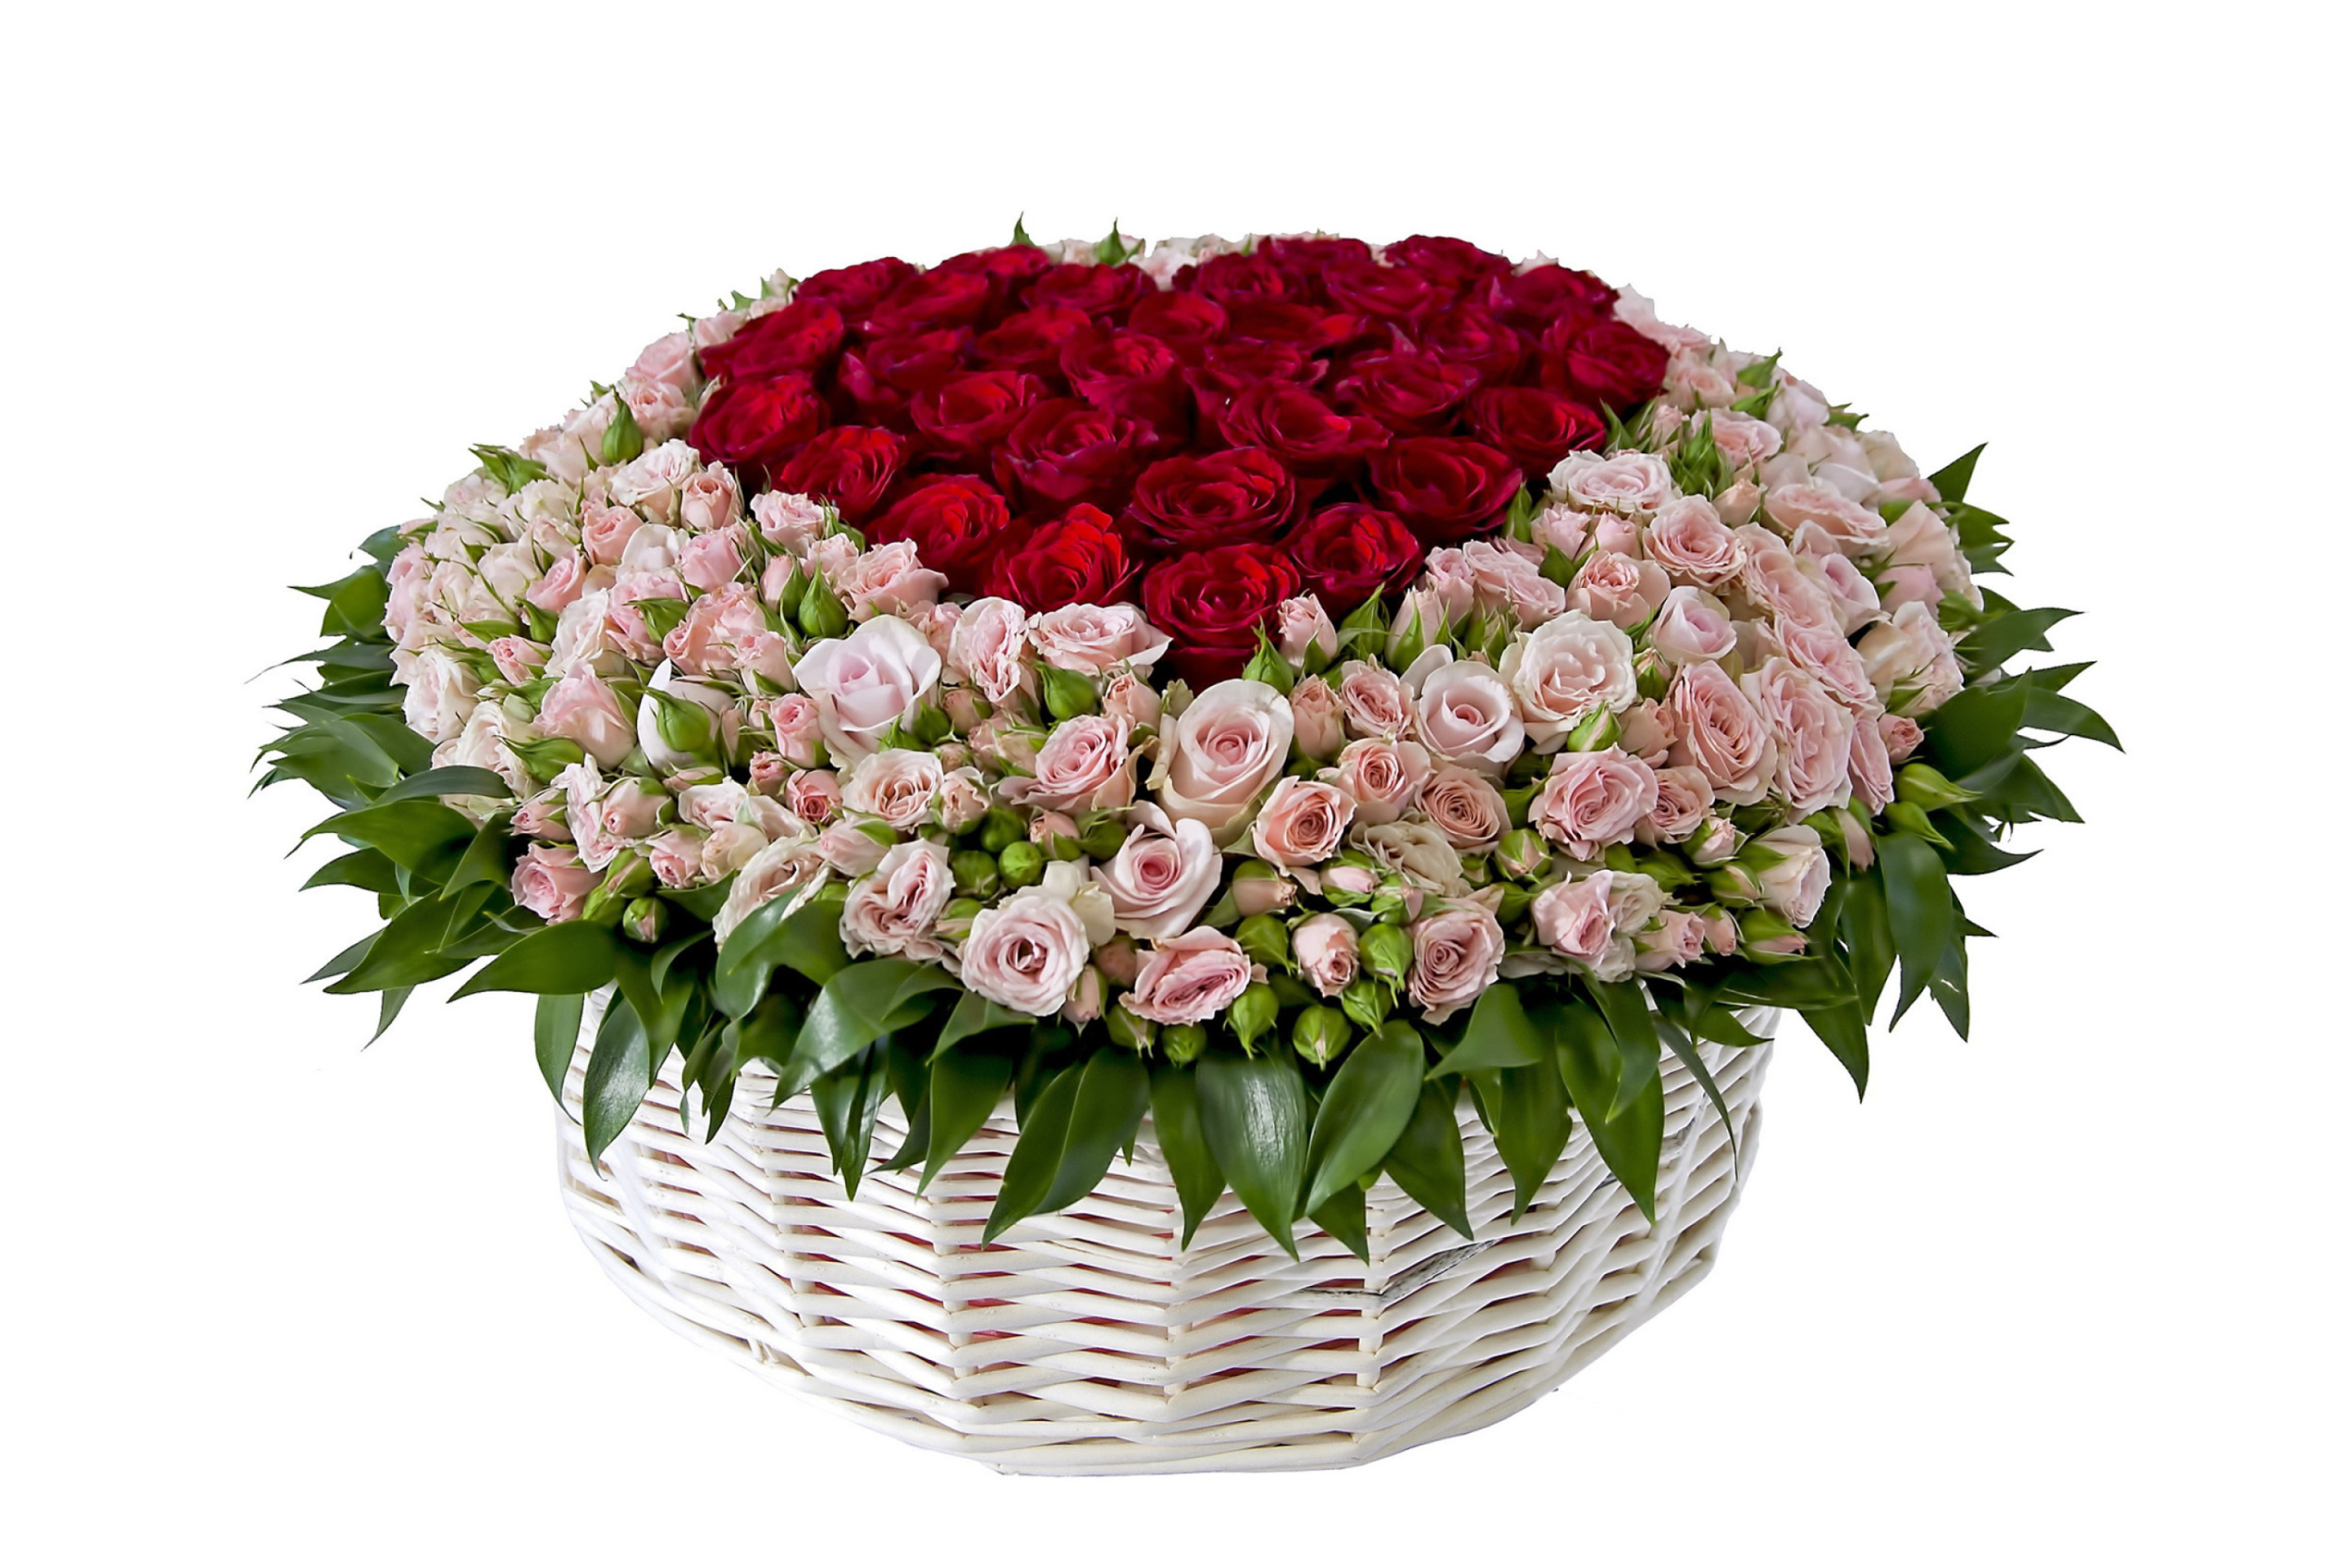 Basket of Roses from Florist wallpaper 2880x1920